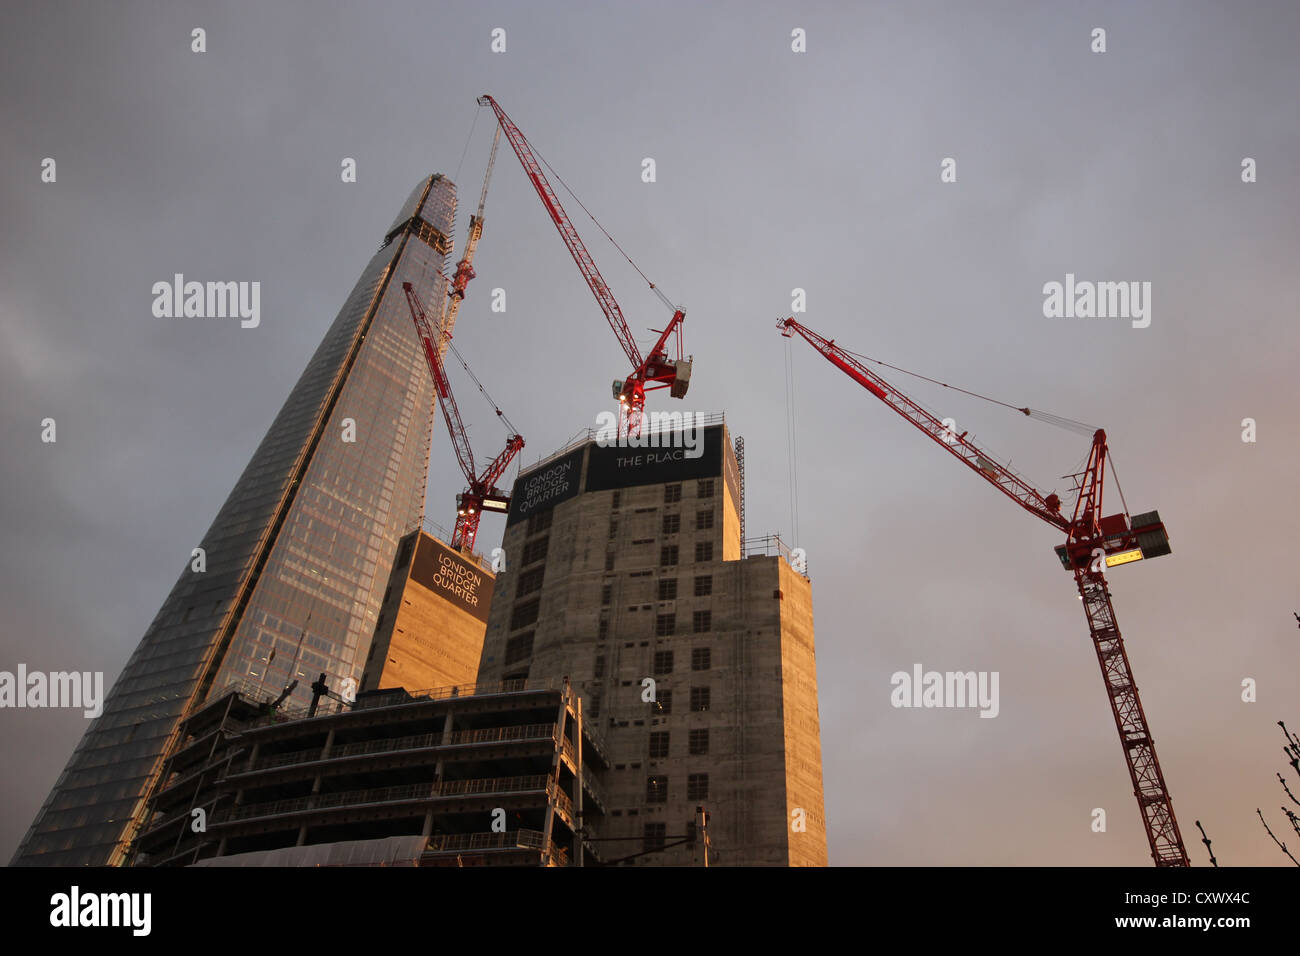 London, buildings and works in the city, cranes europe, architecture, buildings, windows, modern architecture, photoarkive Stock Photo